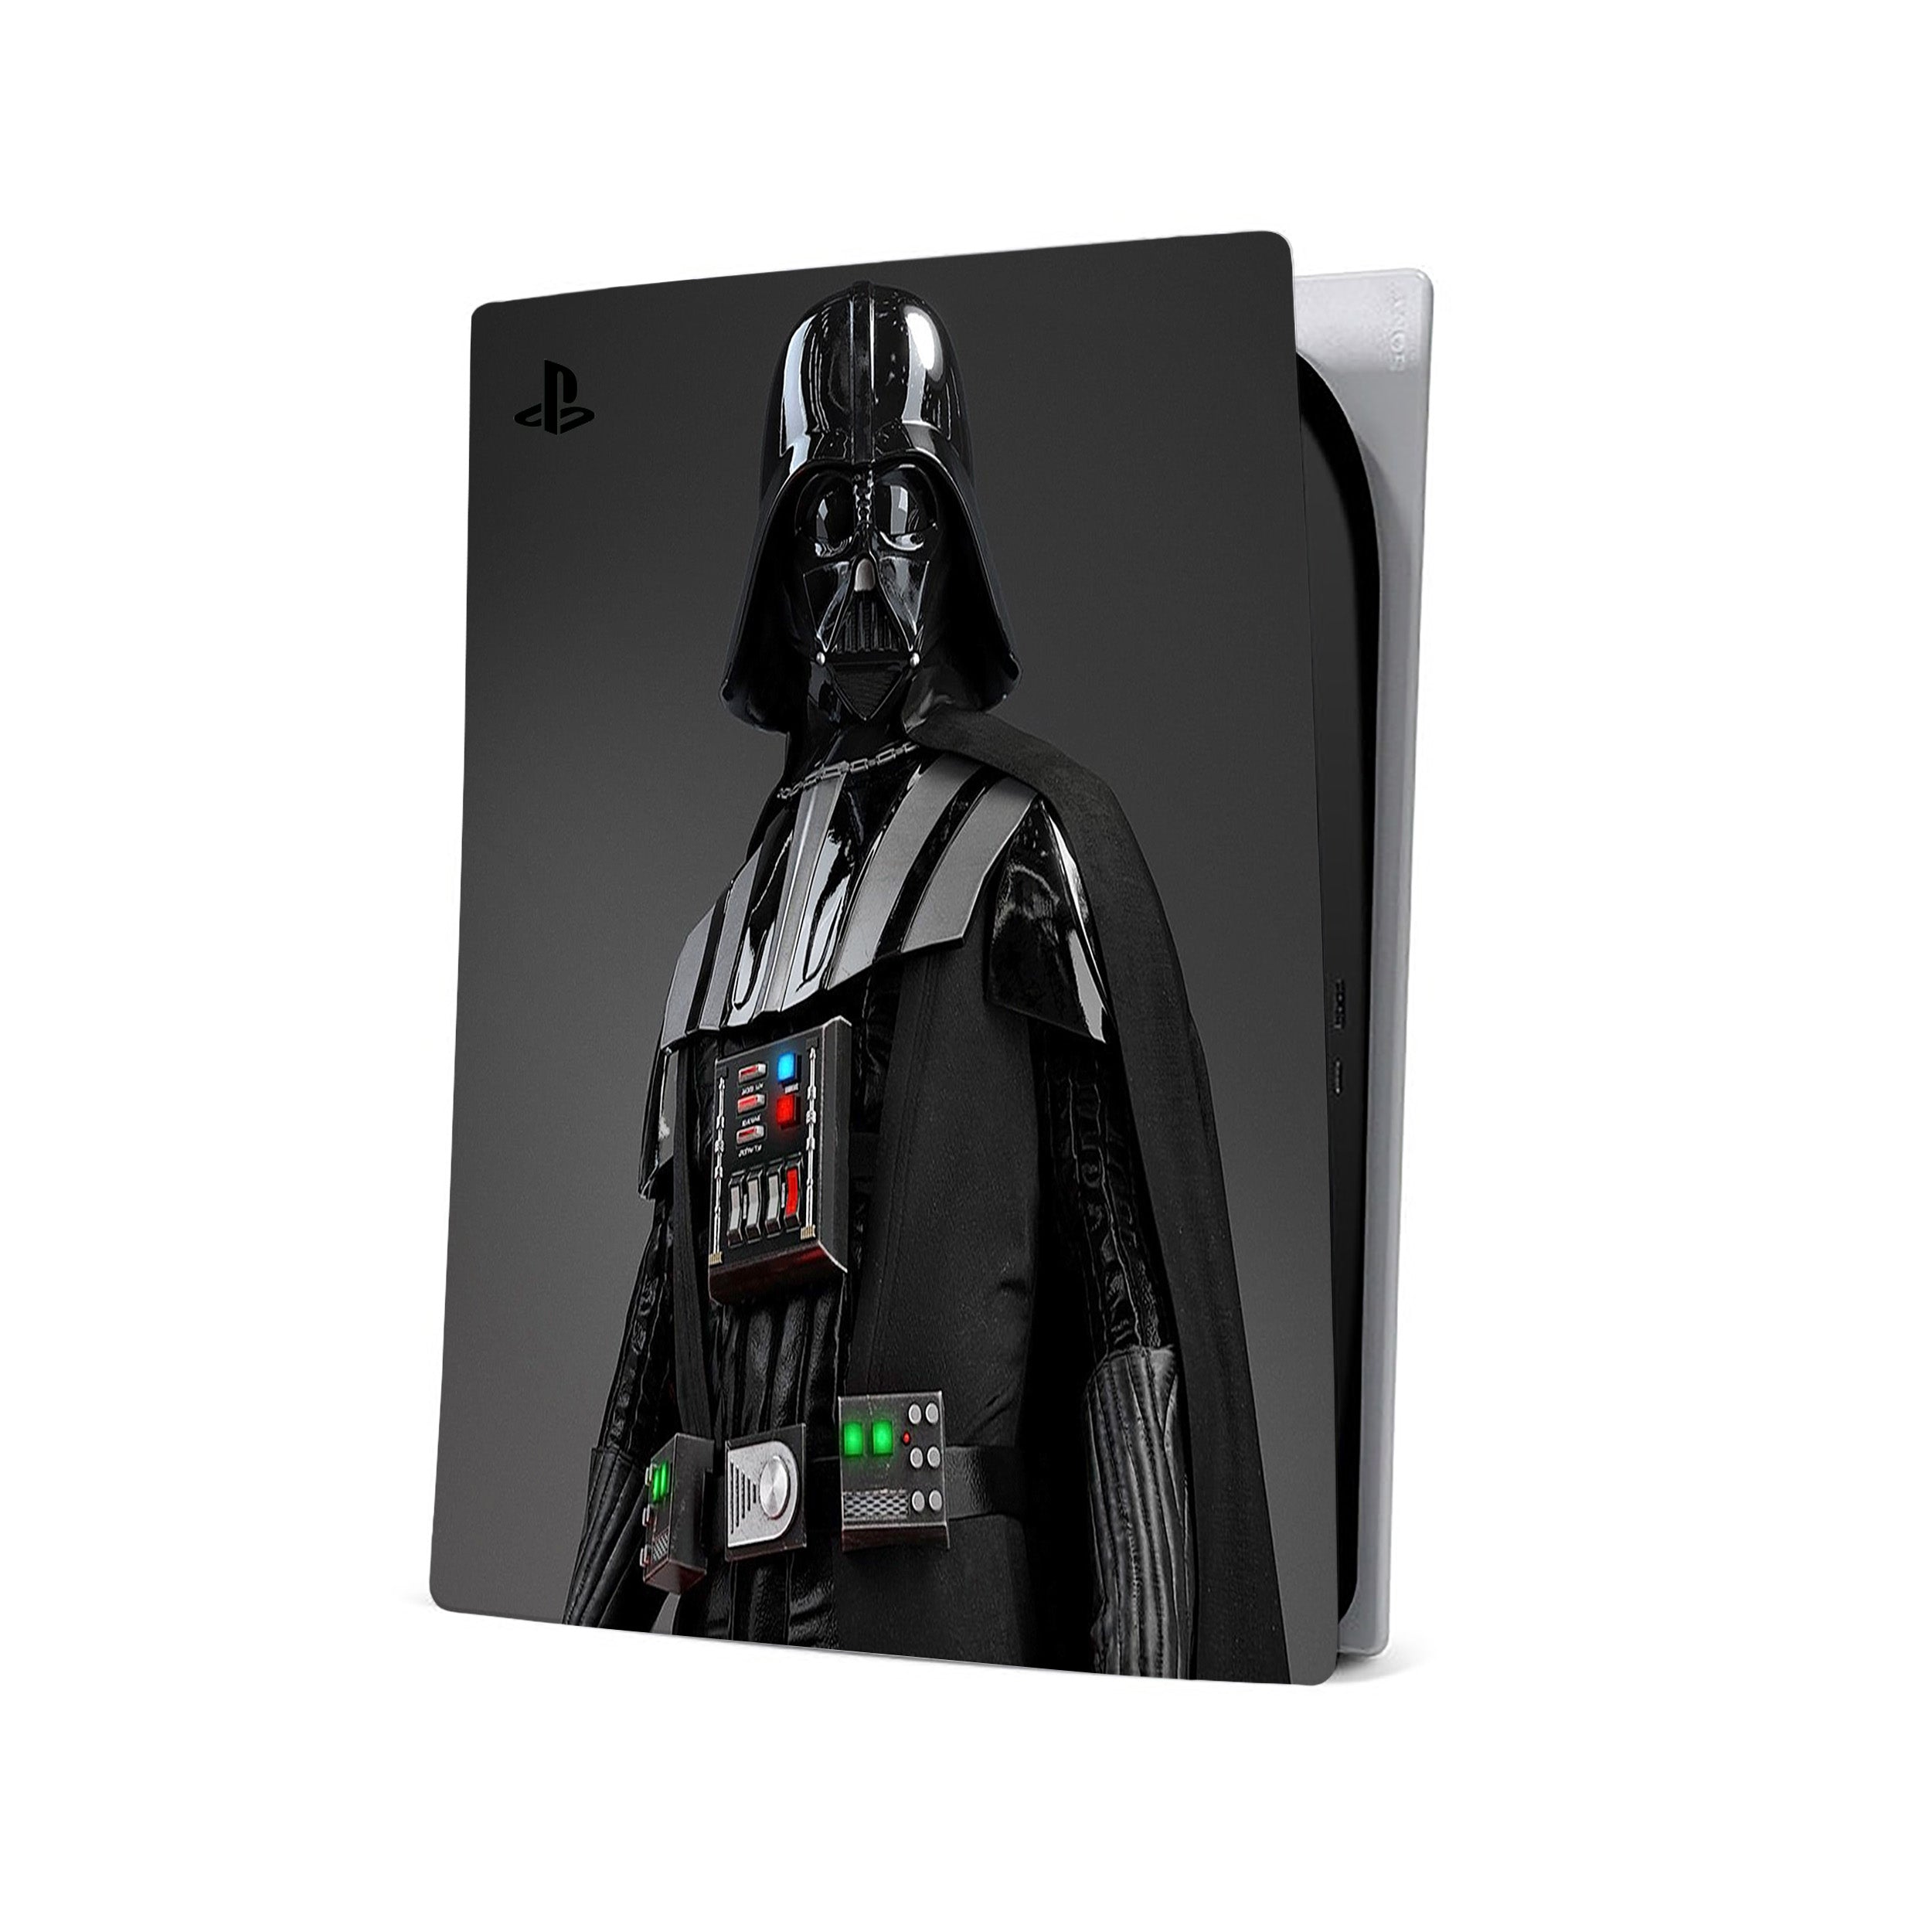 A video game skin featuring a Star Wars Darth Vader design for the PS5.